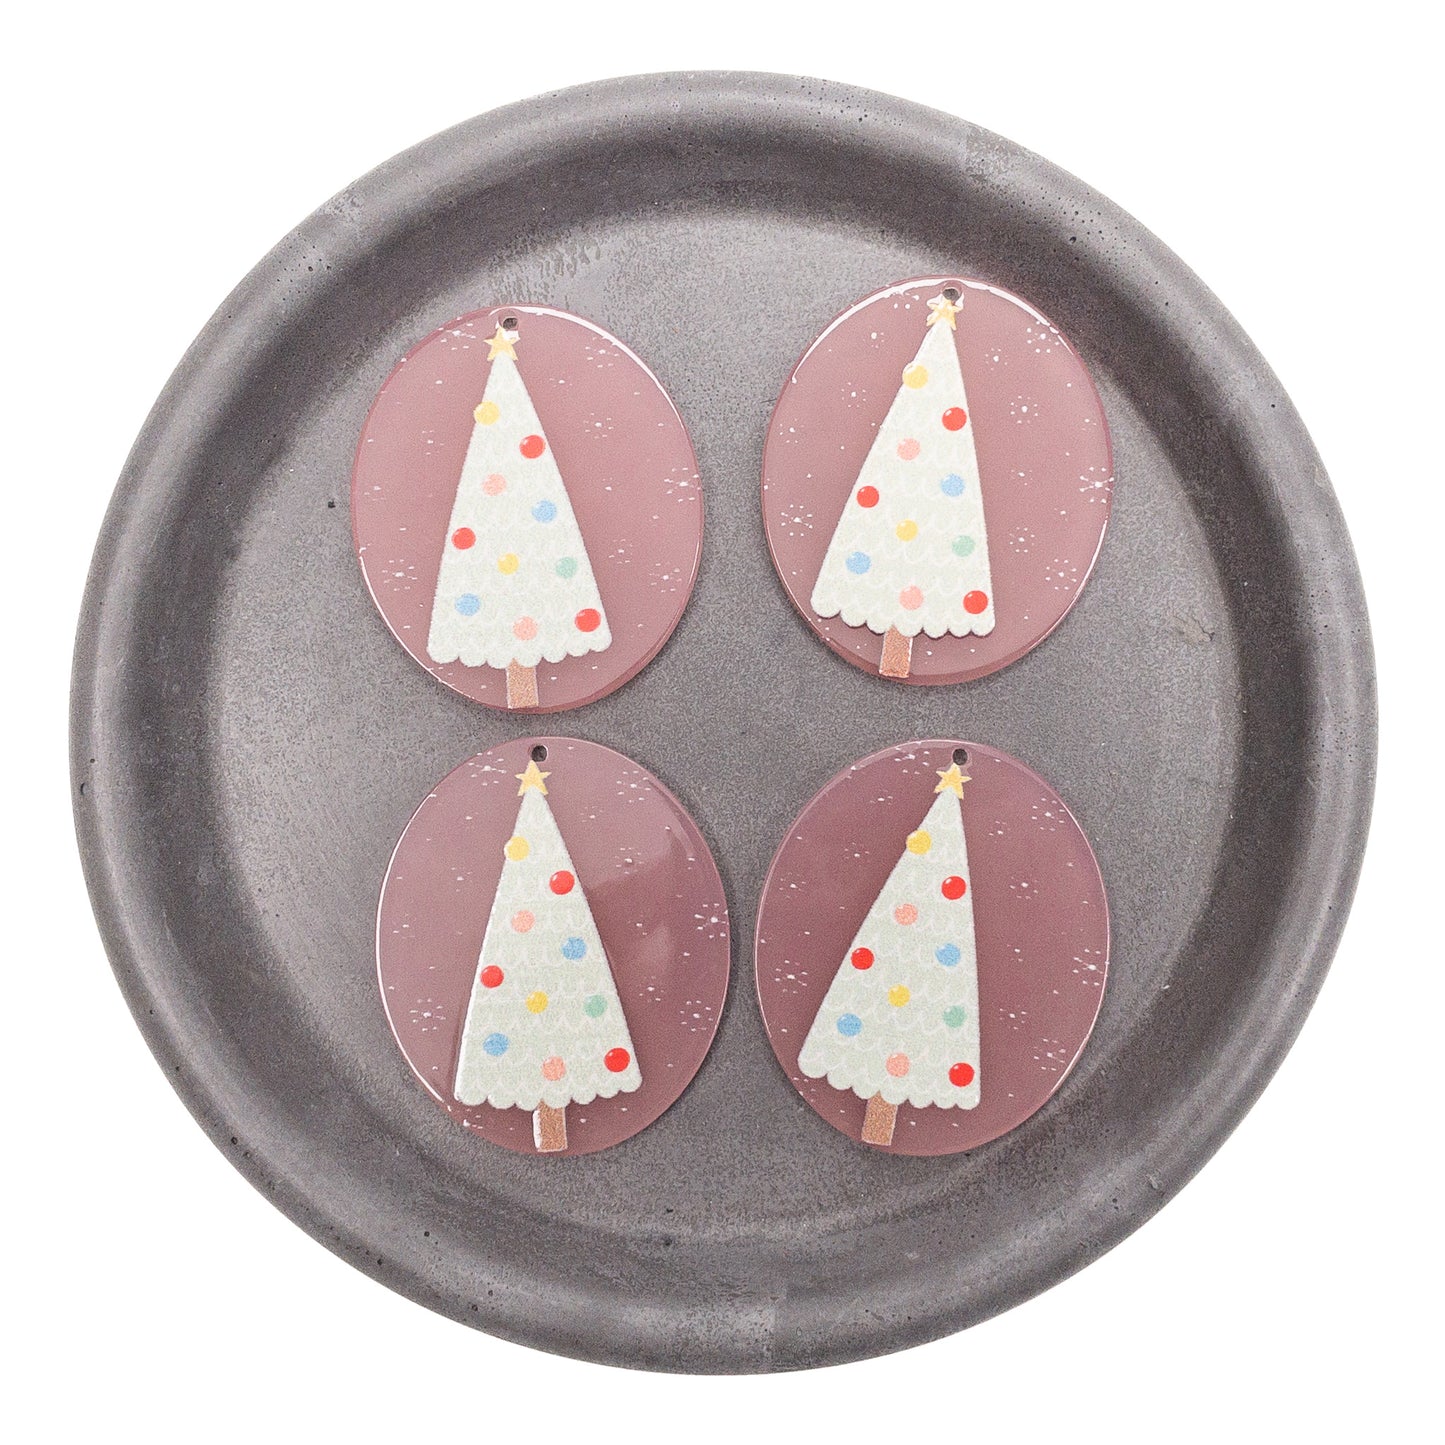 Resin Pink Oval with Christmas Tree Charm - 4 pcs.